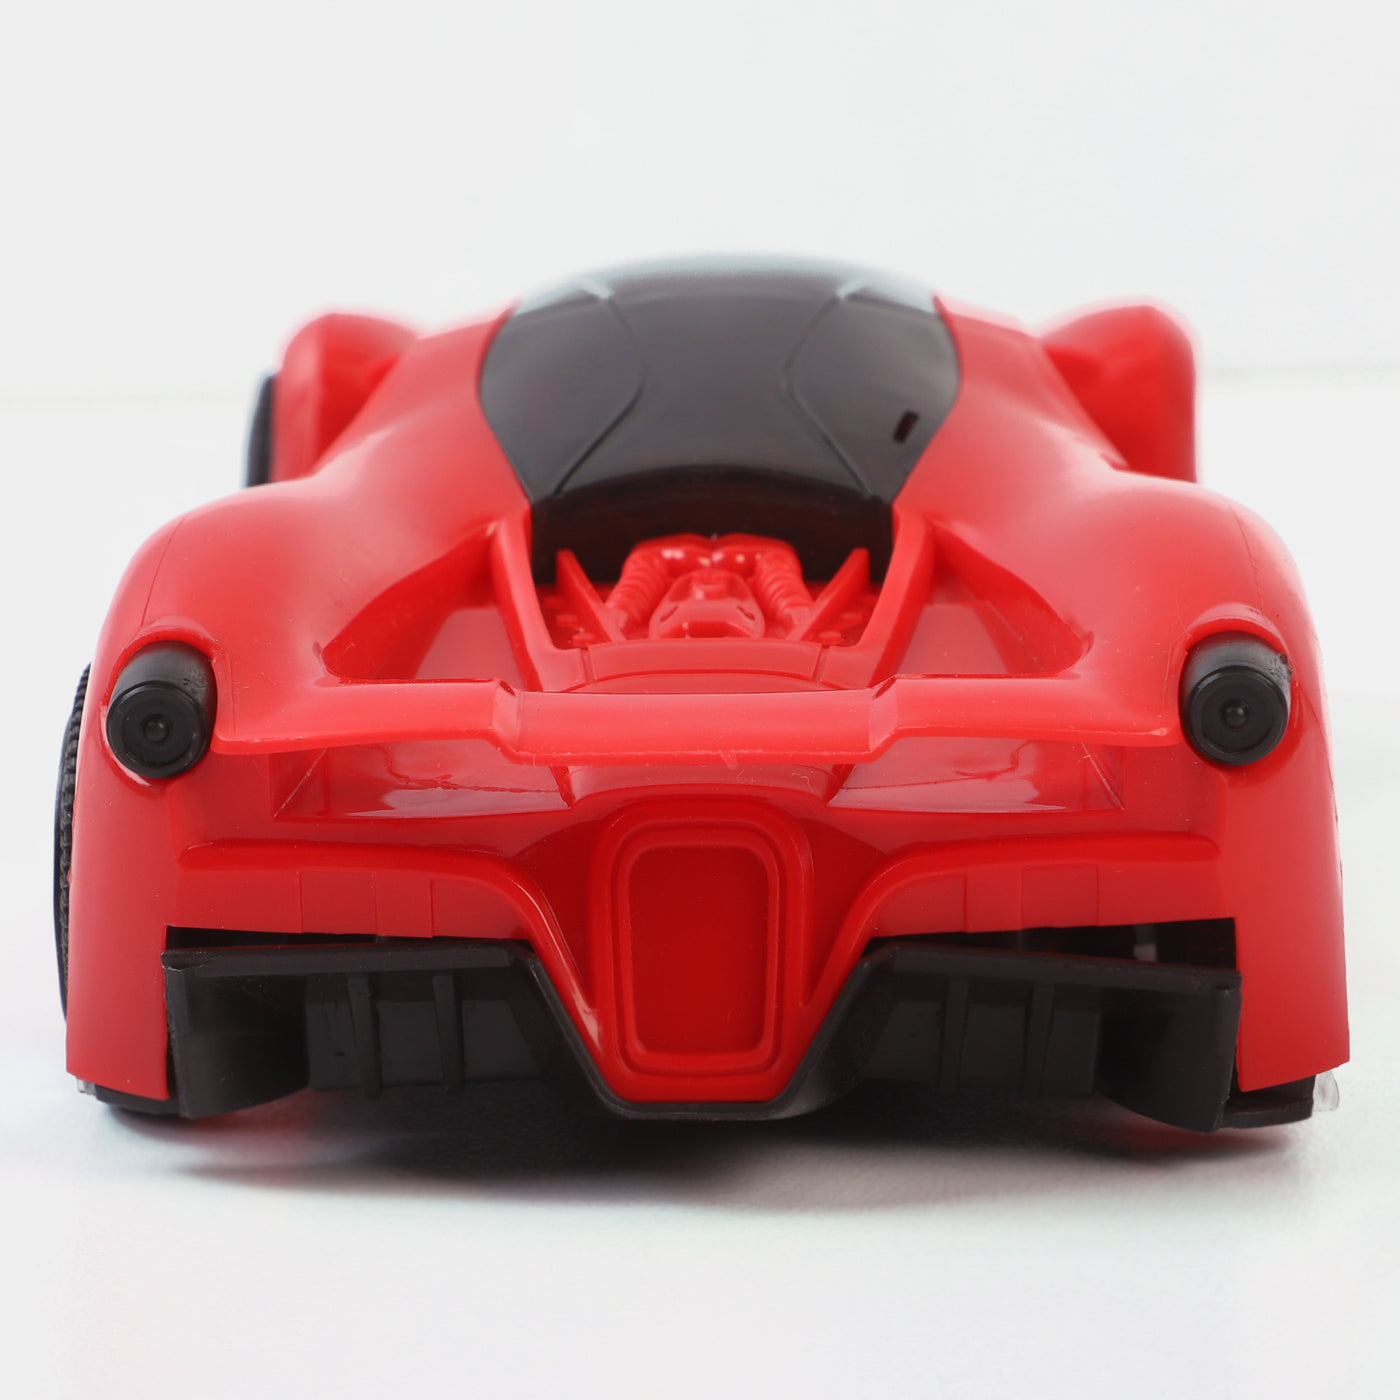 Electric Universal Simulation Racing Car Toy